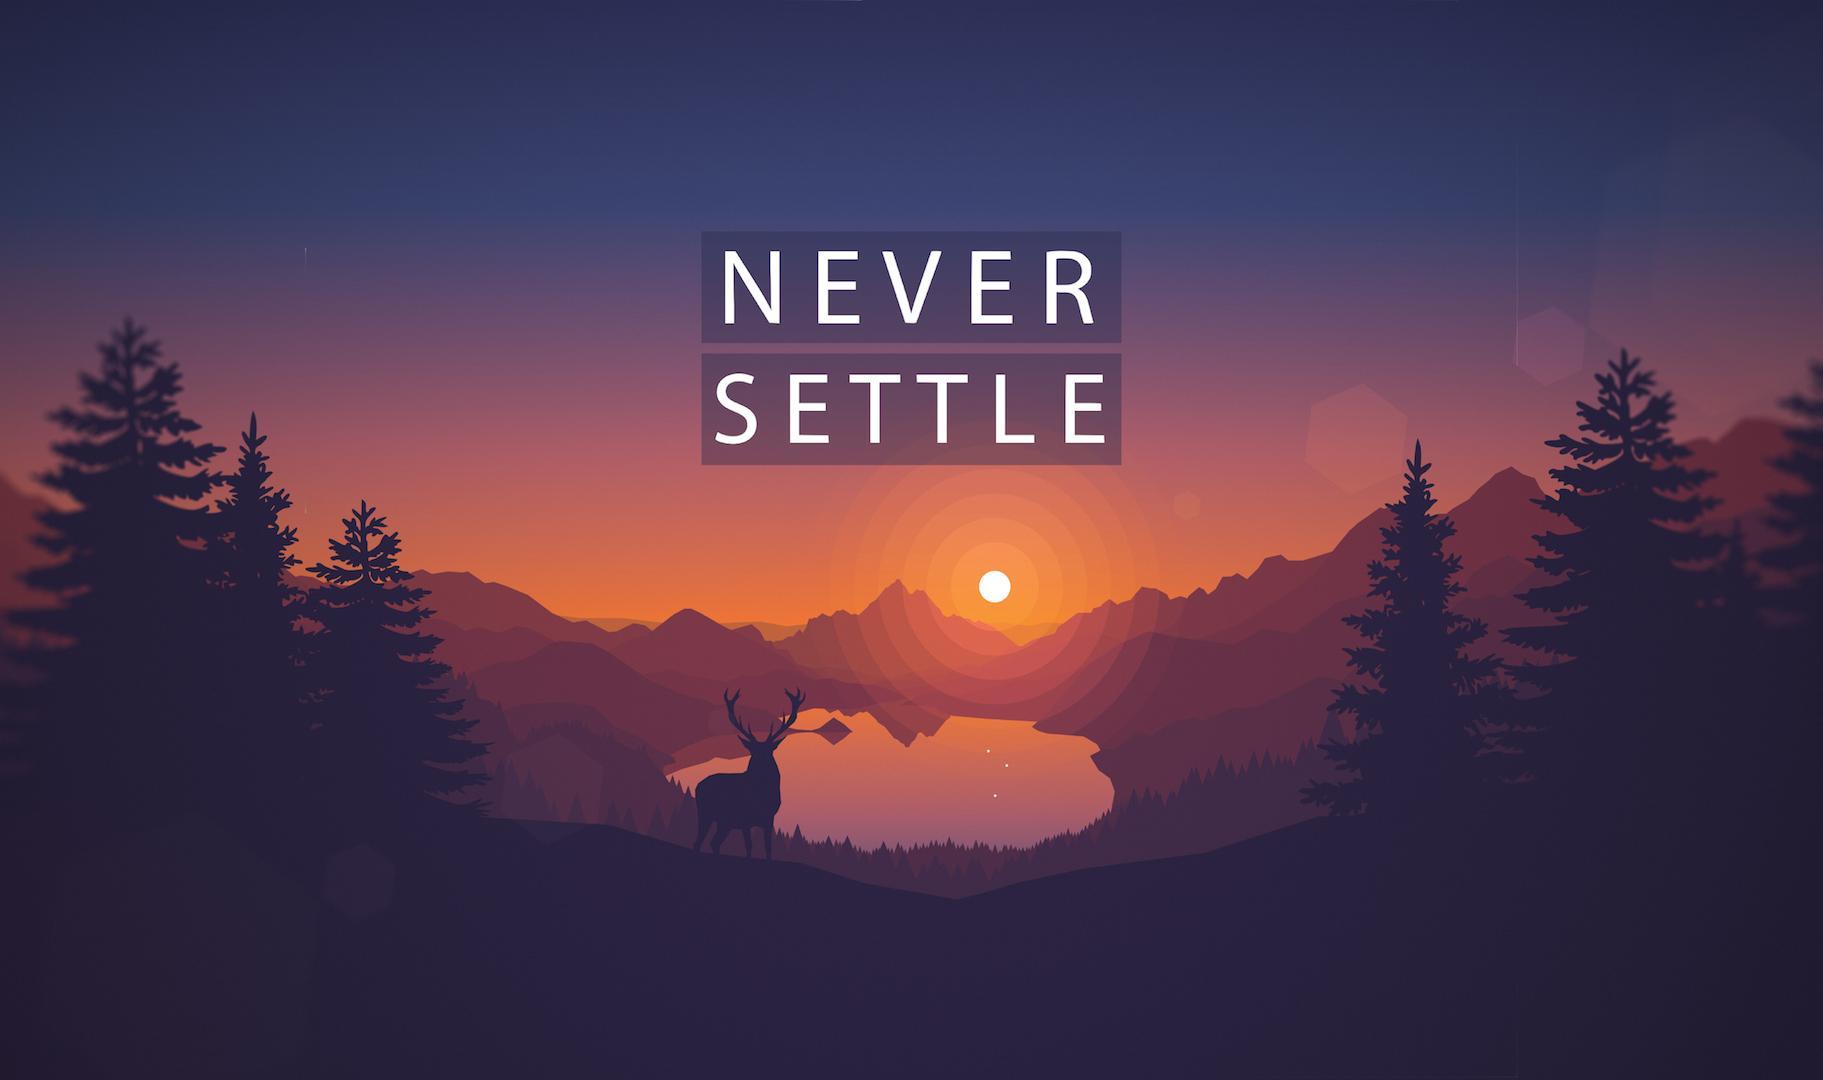 Just a NEVER SETTLE Wallpaper that I made just added